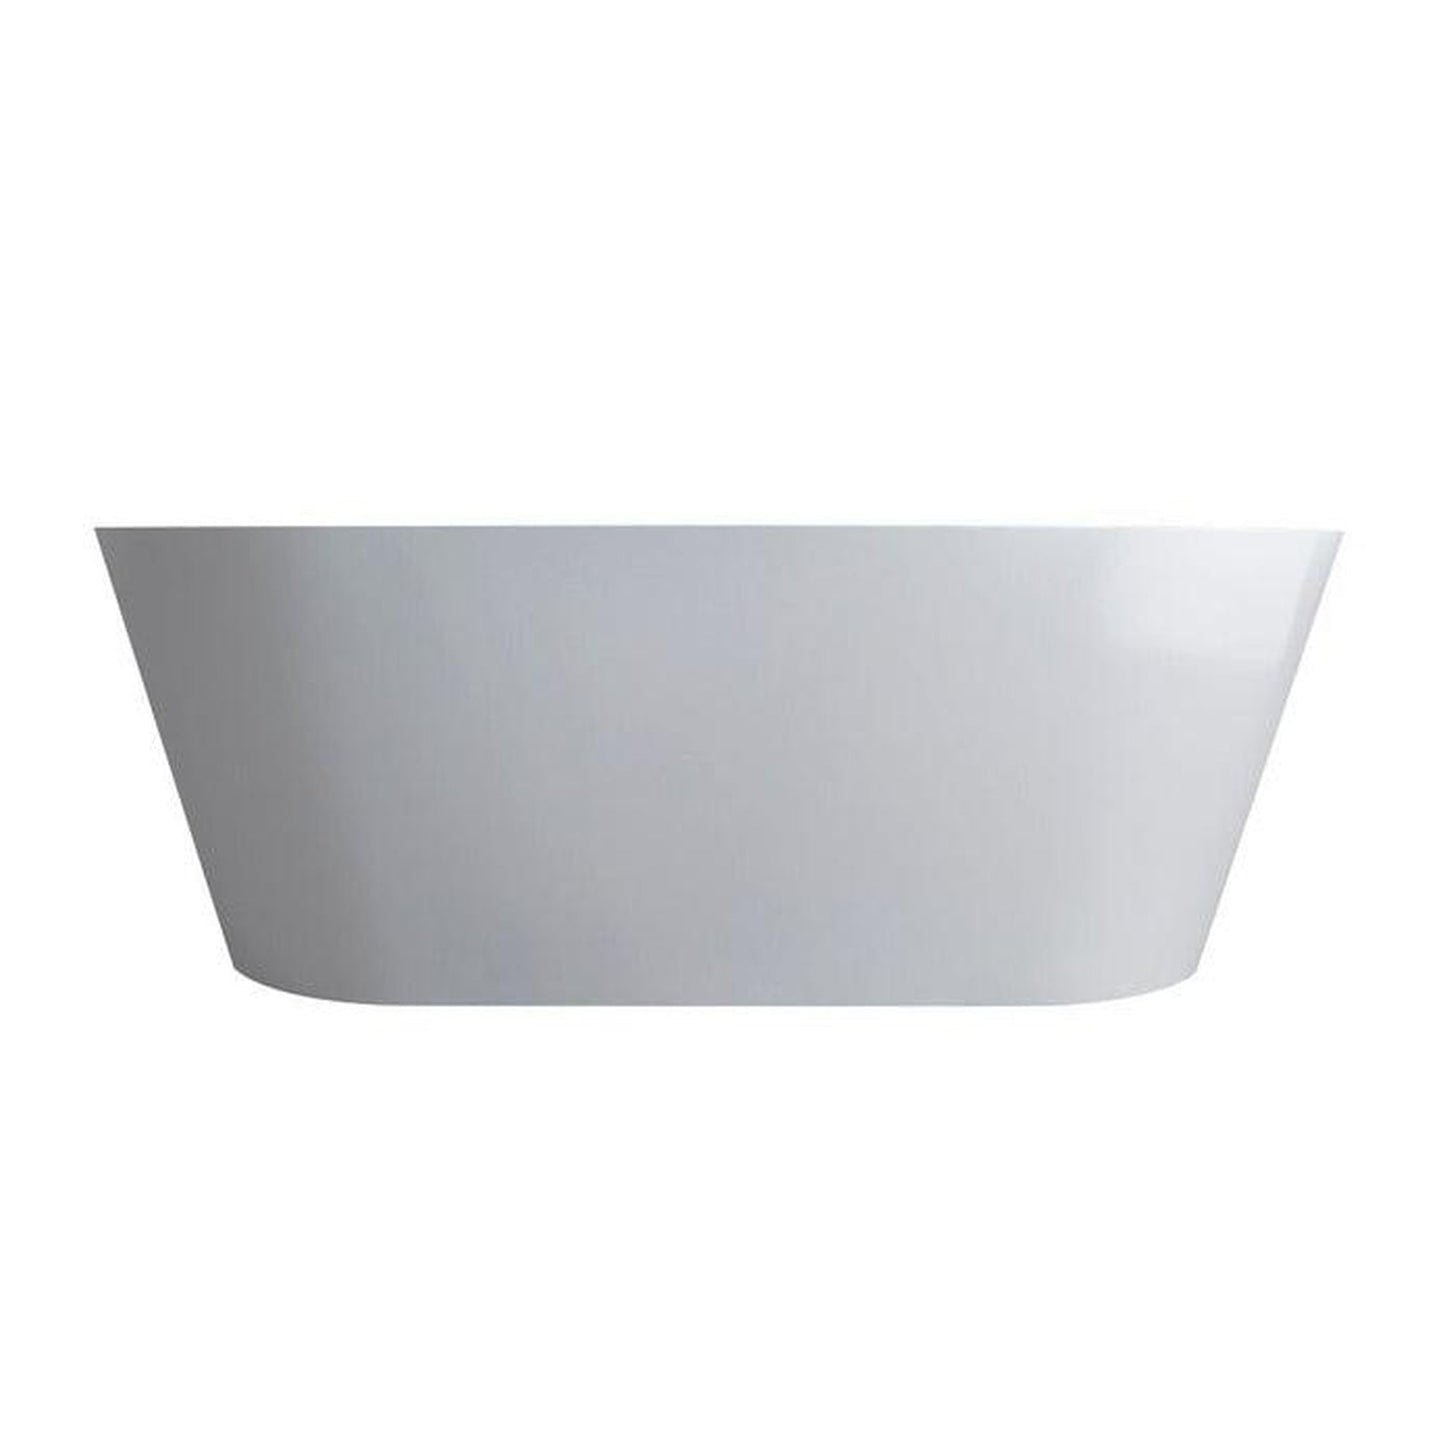 Vanity Art 59" Glossy White Solid Surface Resin Stone Freestanding Bathtub With Overflow and Pop-up Drain